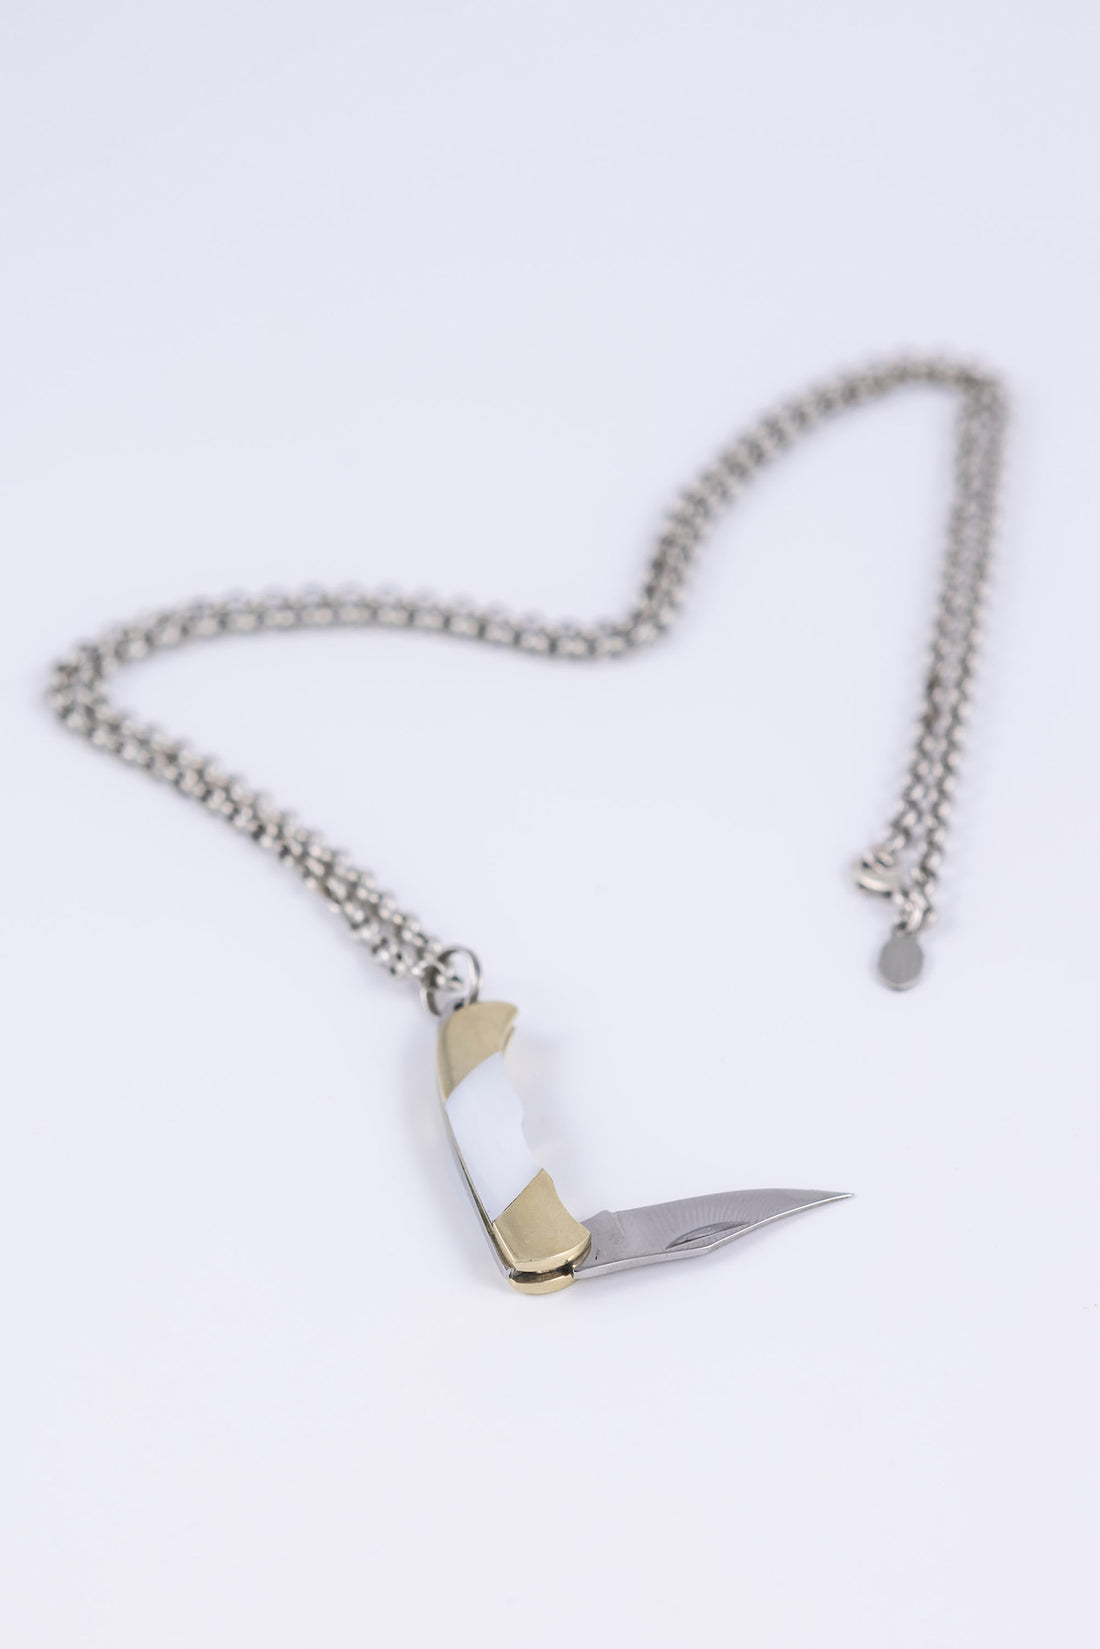 Folding knife necklace open to show sharp steel blade 